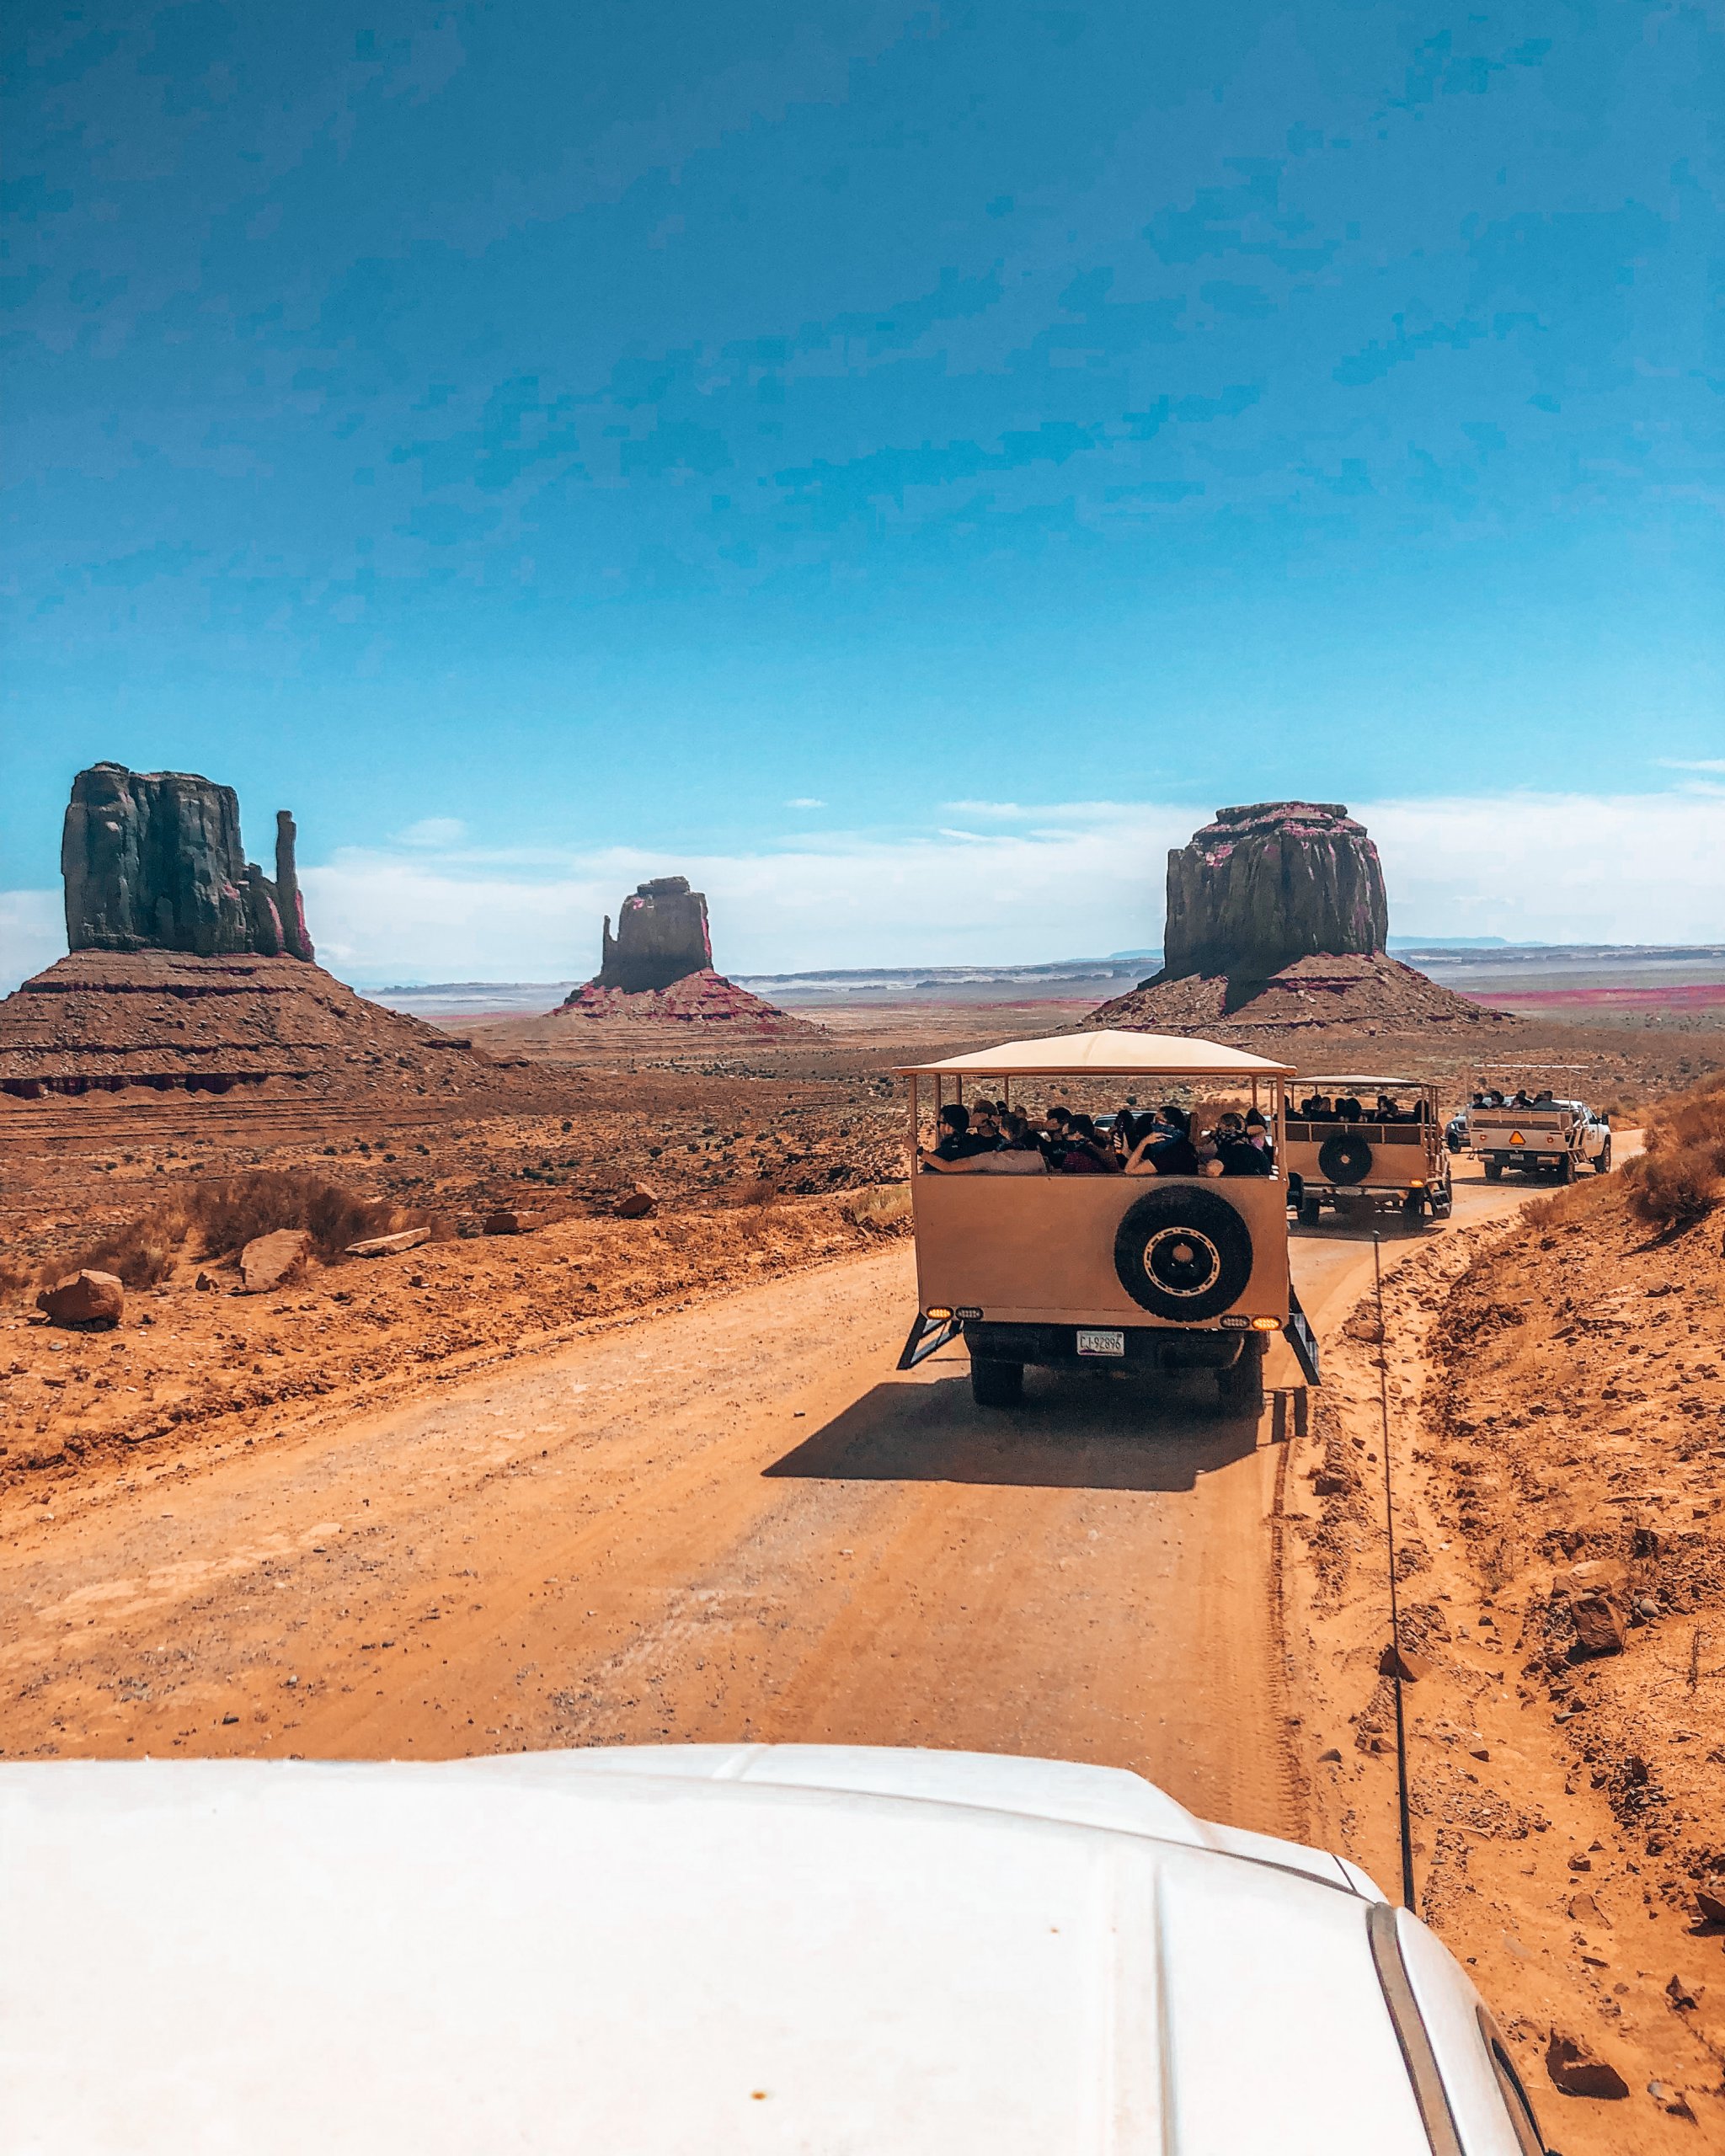 simpson's trailhandler tours monument valley